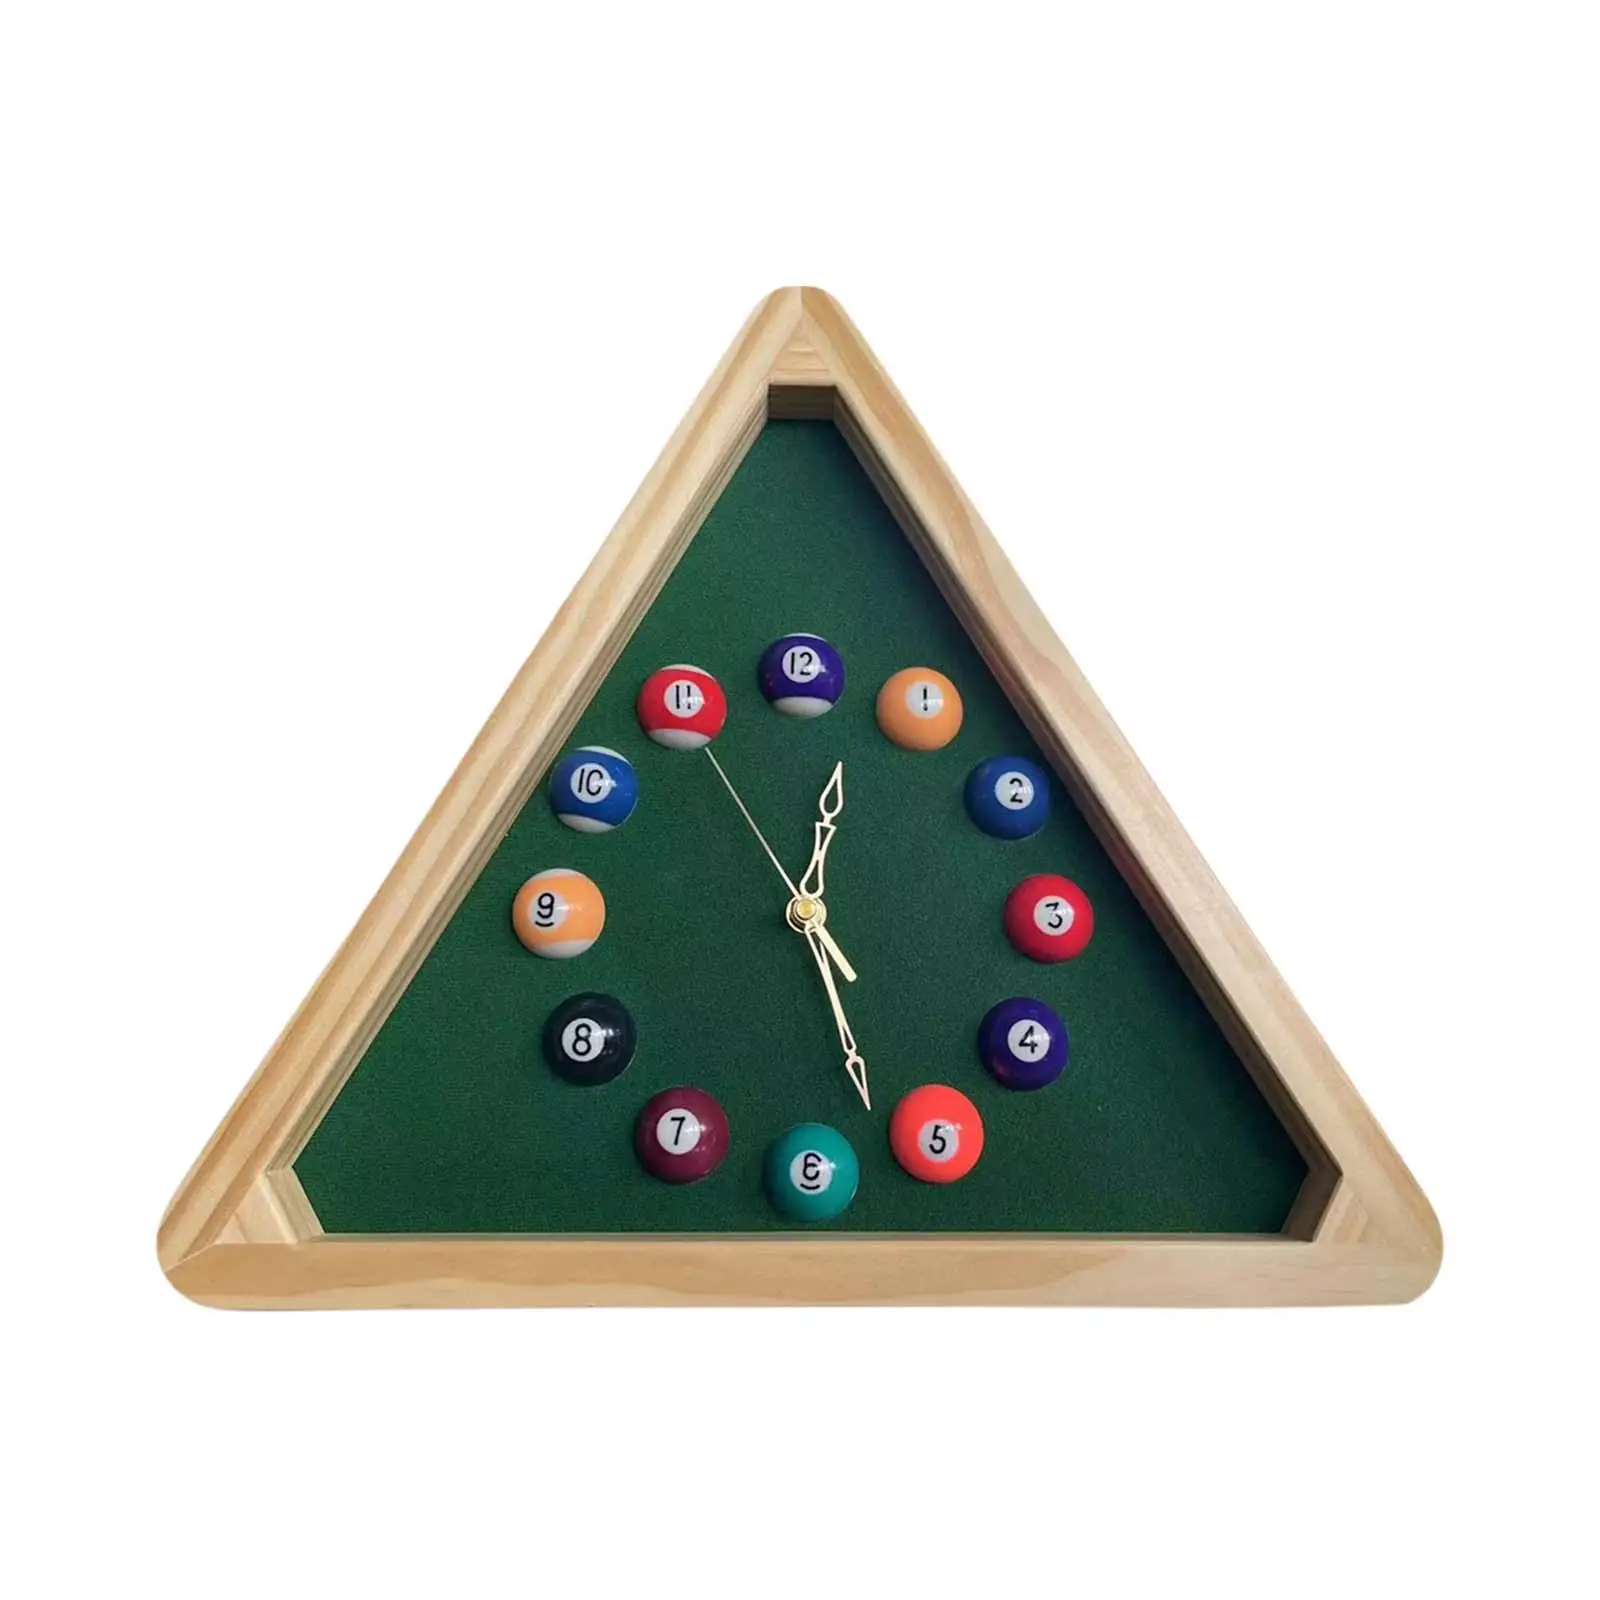 Billiards Theme Wall Clock 14inch Triangle Pool Table Wall Clock Multipurpose Art Hanging Ornament for Game Room Bedroom Home